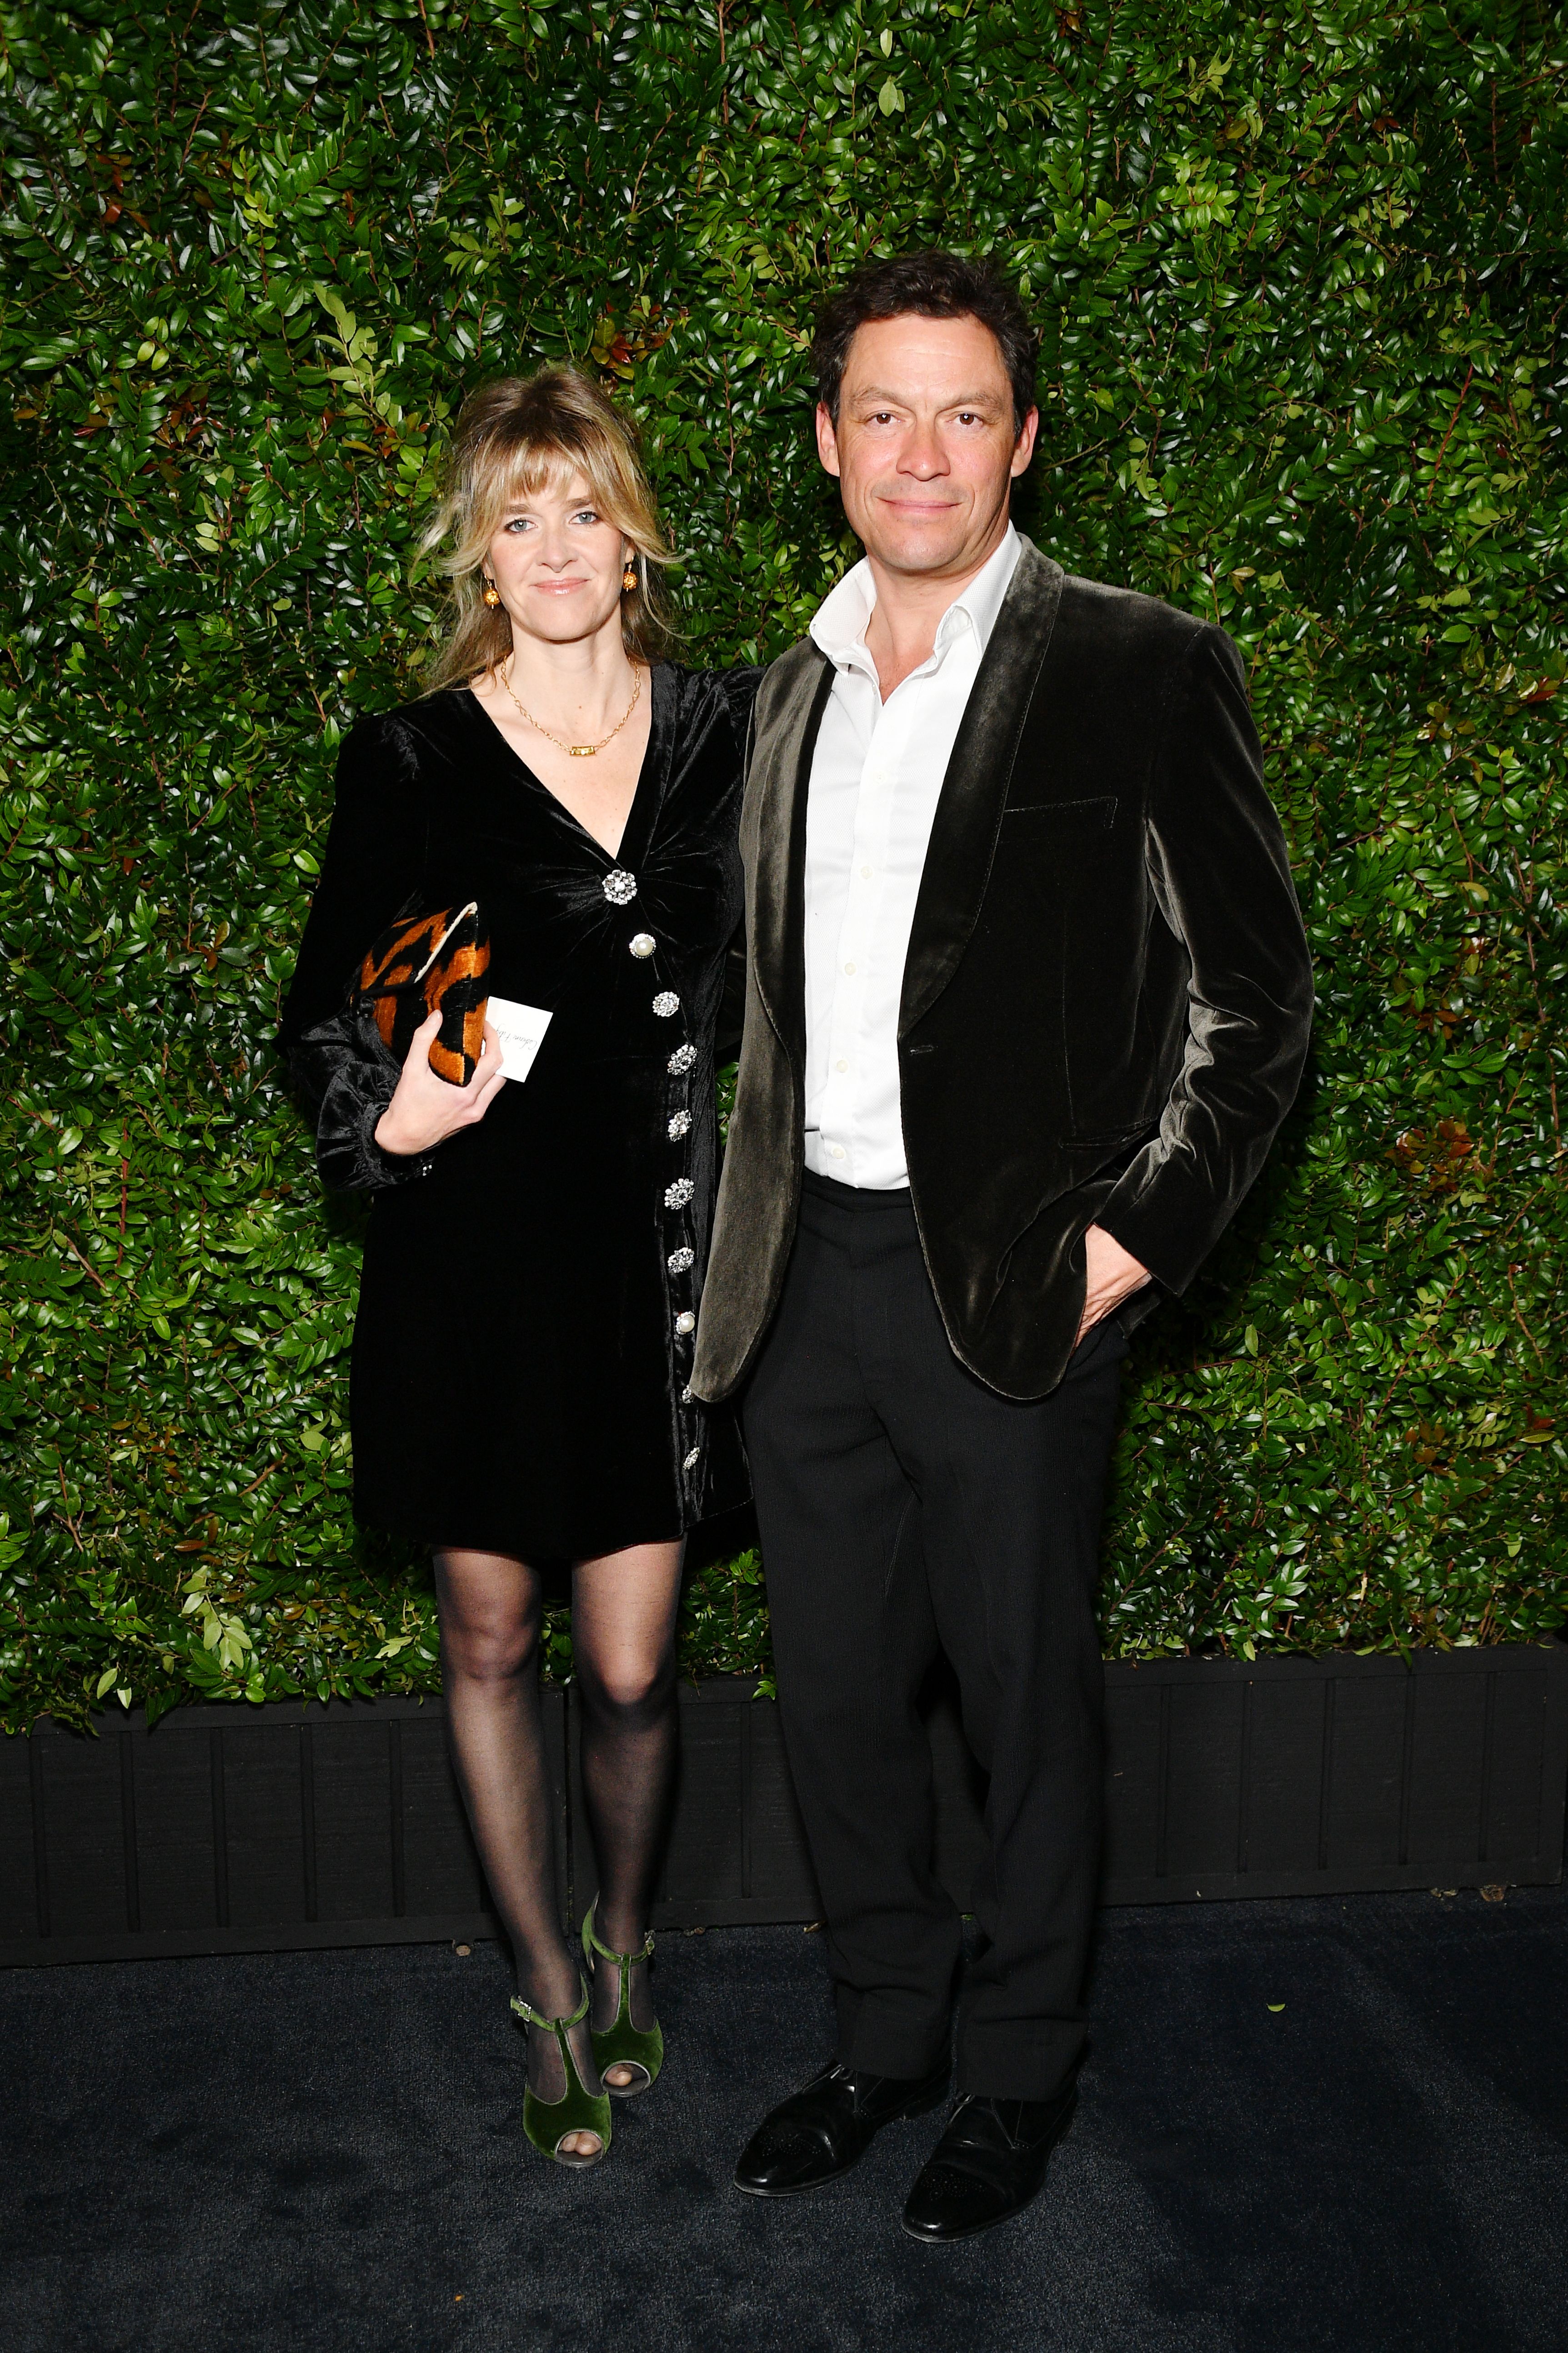 Catherine FitzGerald and Dominic West at Chanel and Charles Finch Pre-Oscar Awards Dinner in Beverly Hills, California on February 23, 2019 | Photo: Dia Dipasupil/WireImage/Getty Images